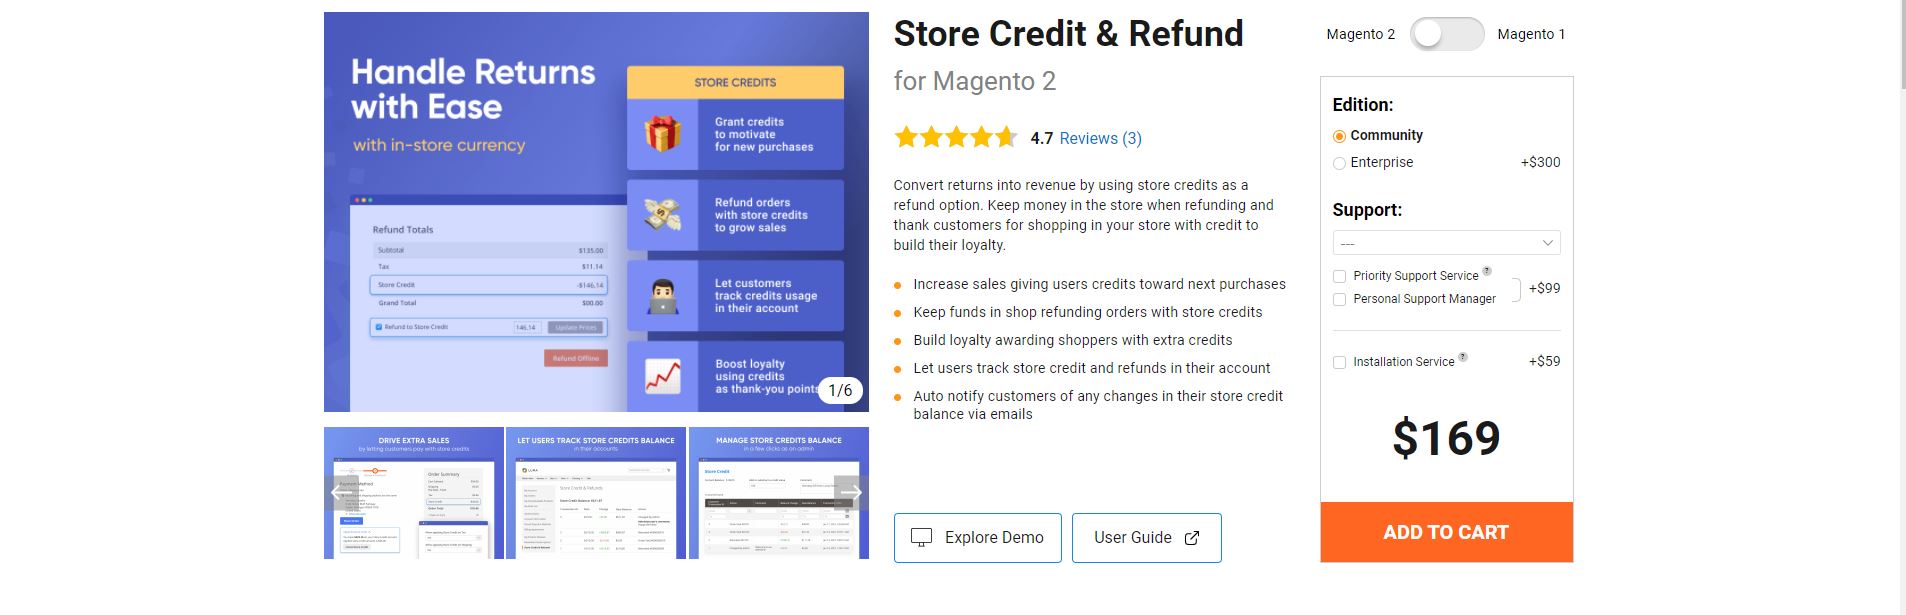 Magento store credit extension